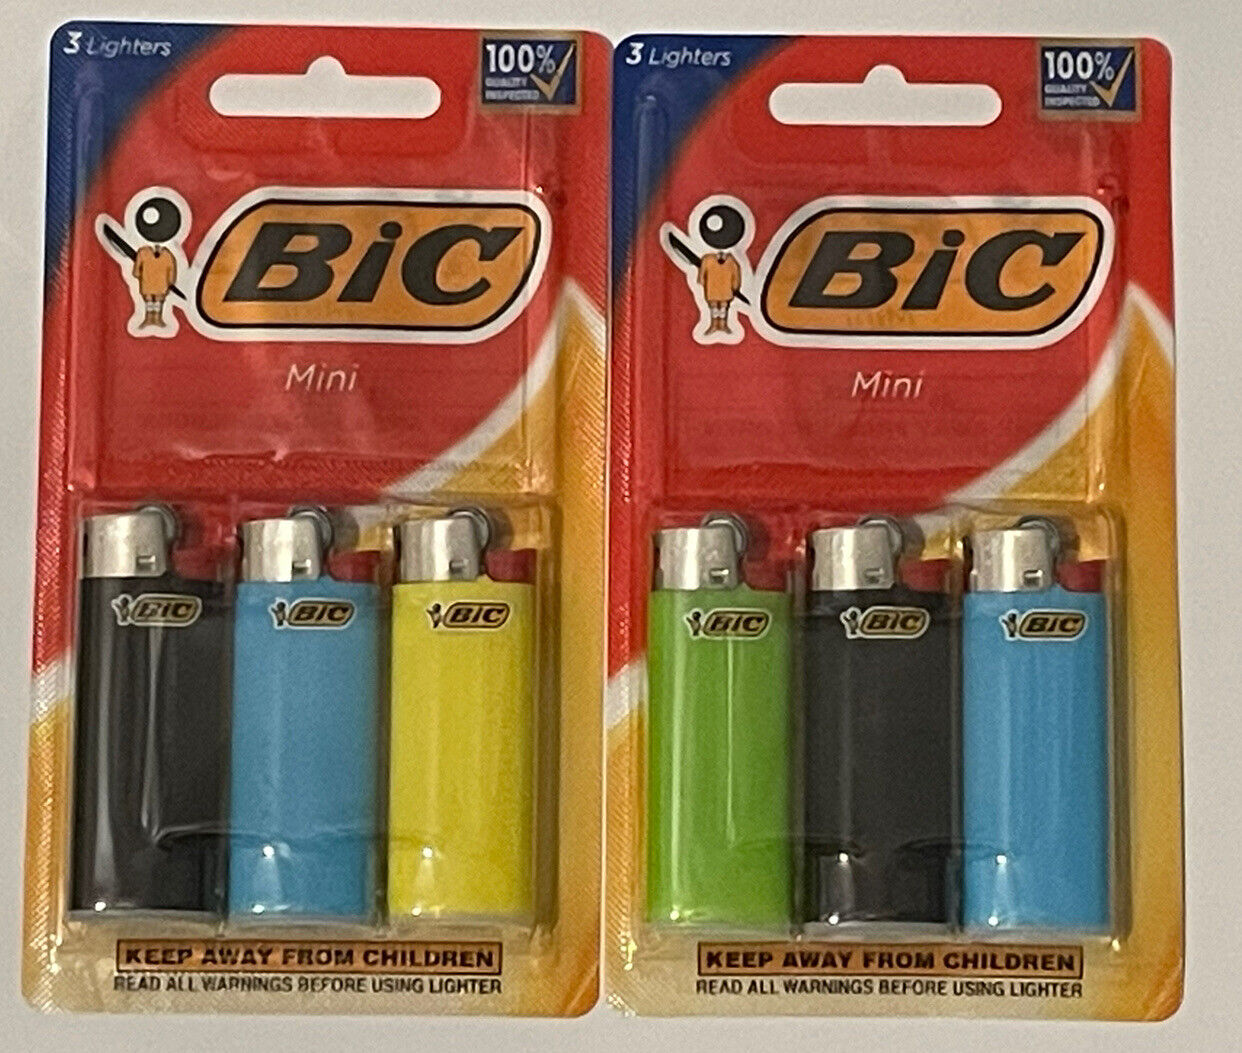 BIC Mini Lighters 6 Count (2 Packs of 3) Assorted Colors Brand New Sealed Packs